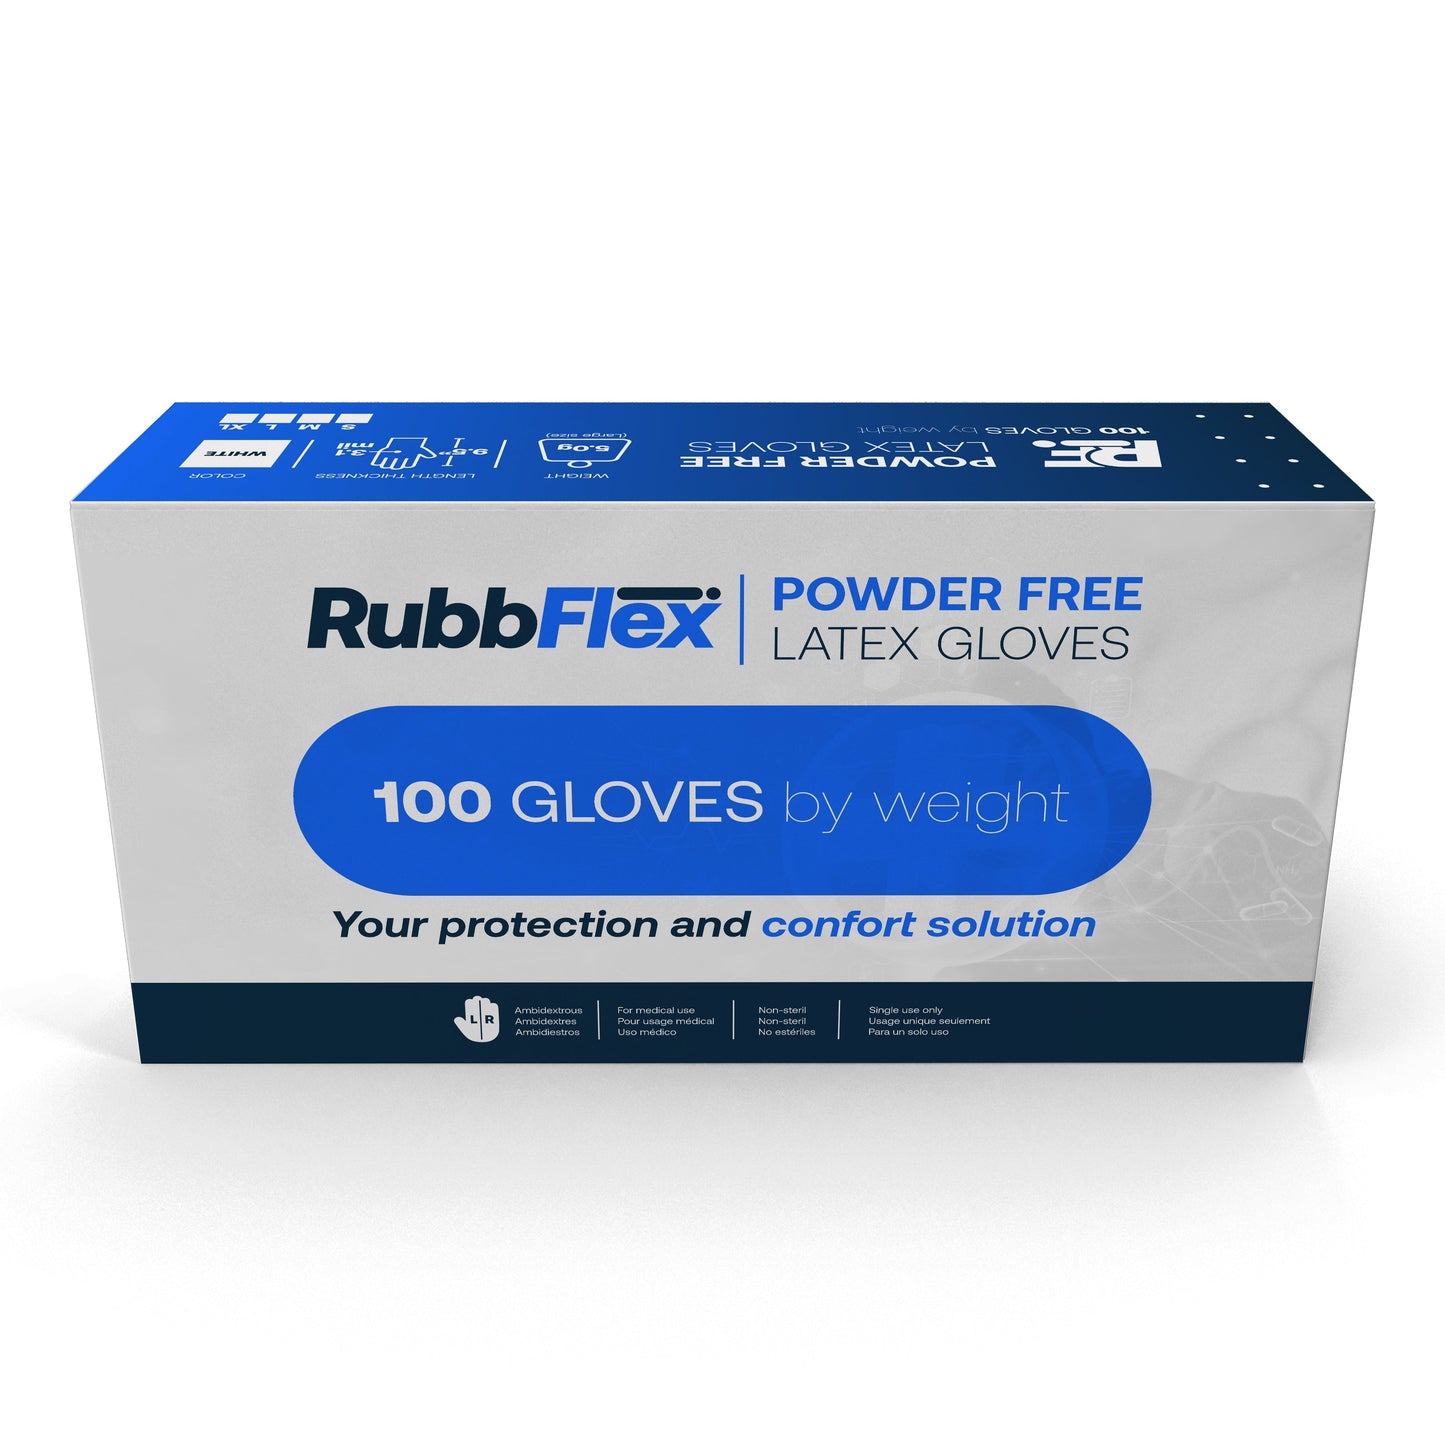 Rubbflex Latex Powder Free Disposable Gloves RLX100S - Medical Exam Grade - 3.1 mil Thick (Pack of 100) SMALL